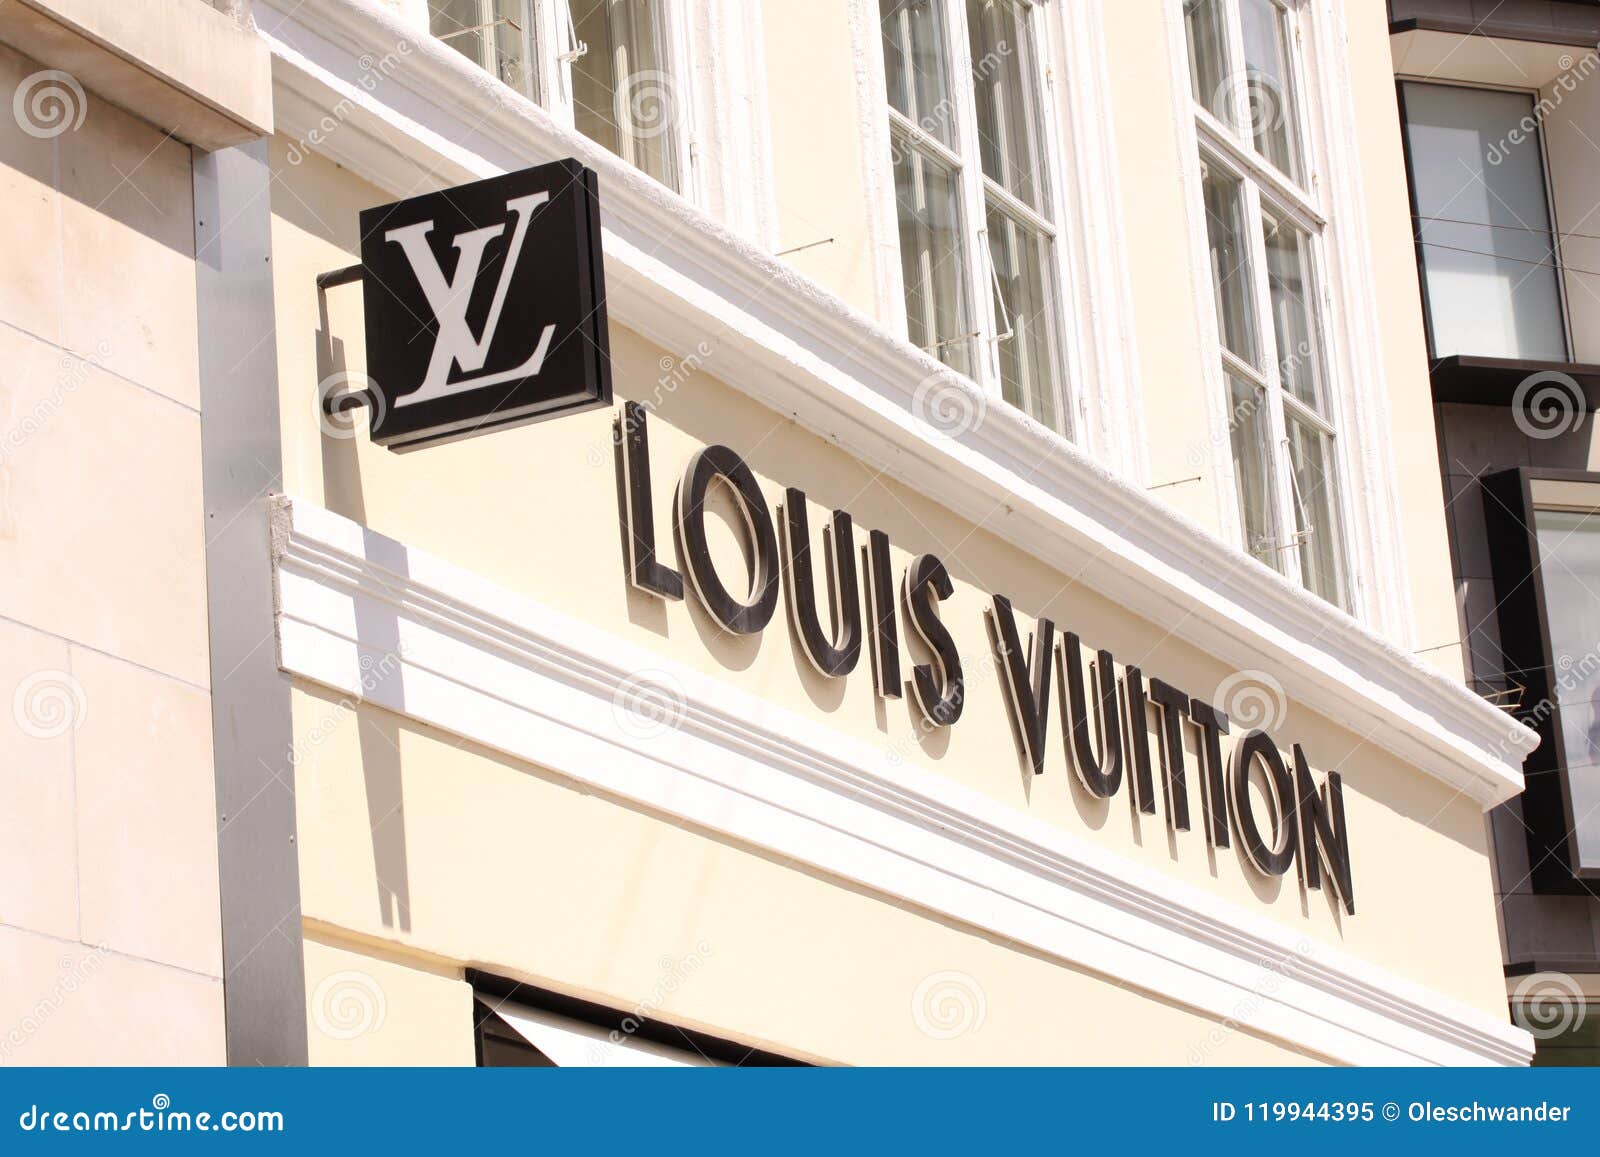 Louis Vuitton Logo Sign Panel on Shop. Louis Vuitton is a Famous High End  Fashion House Manufacturer and Luxury Retail Company Fro Editorial Image -  Image of fashion, lifestyle: 119944395